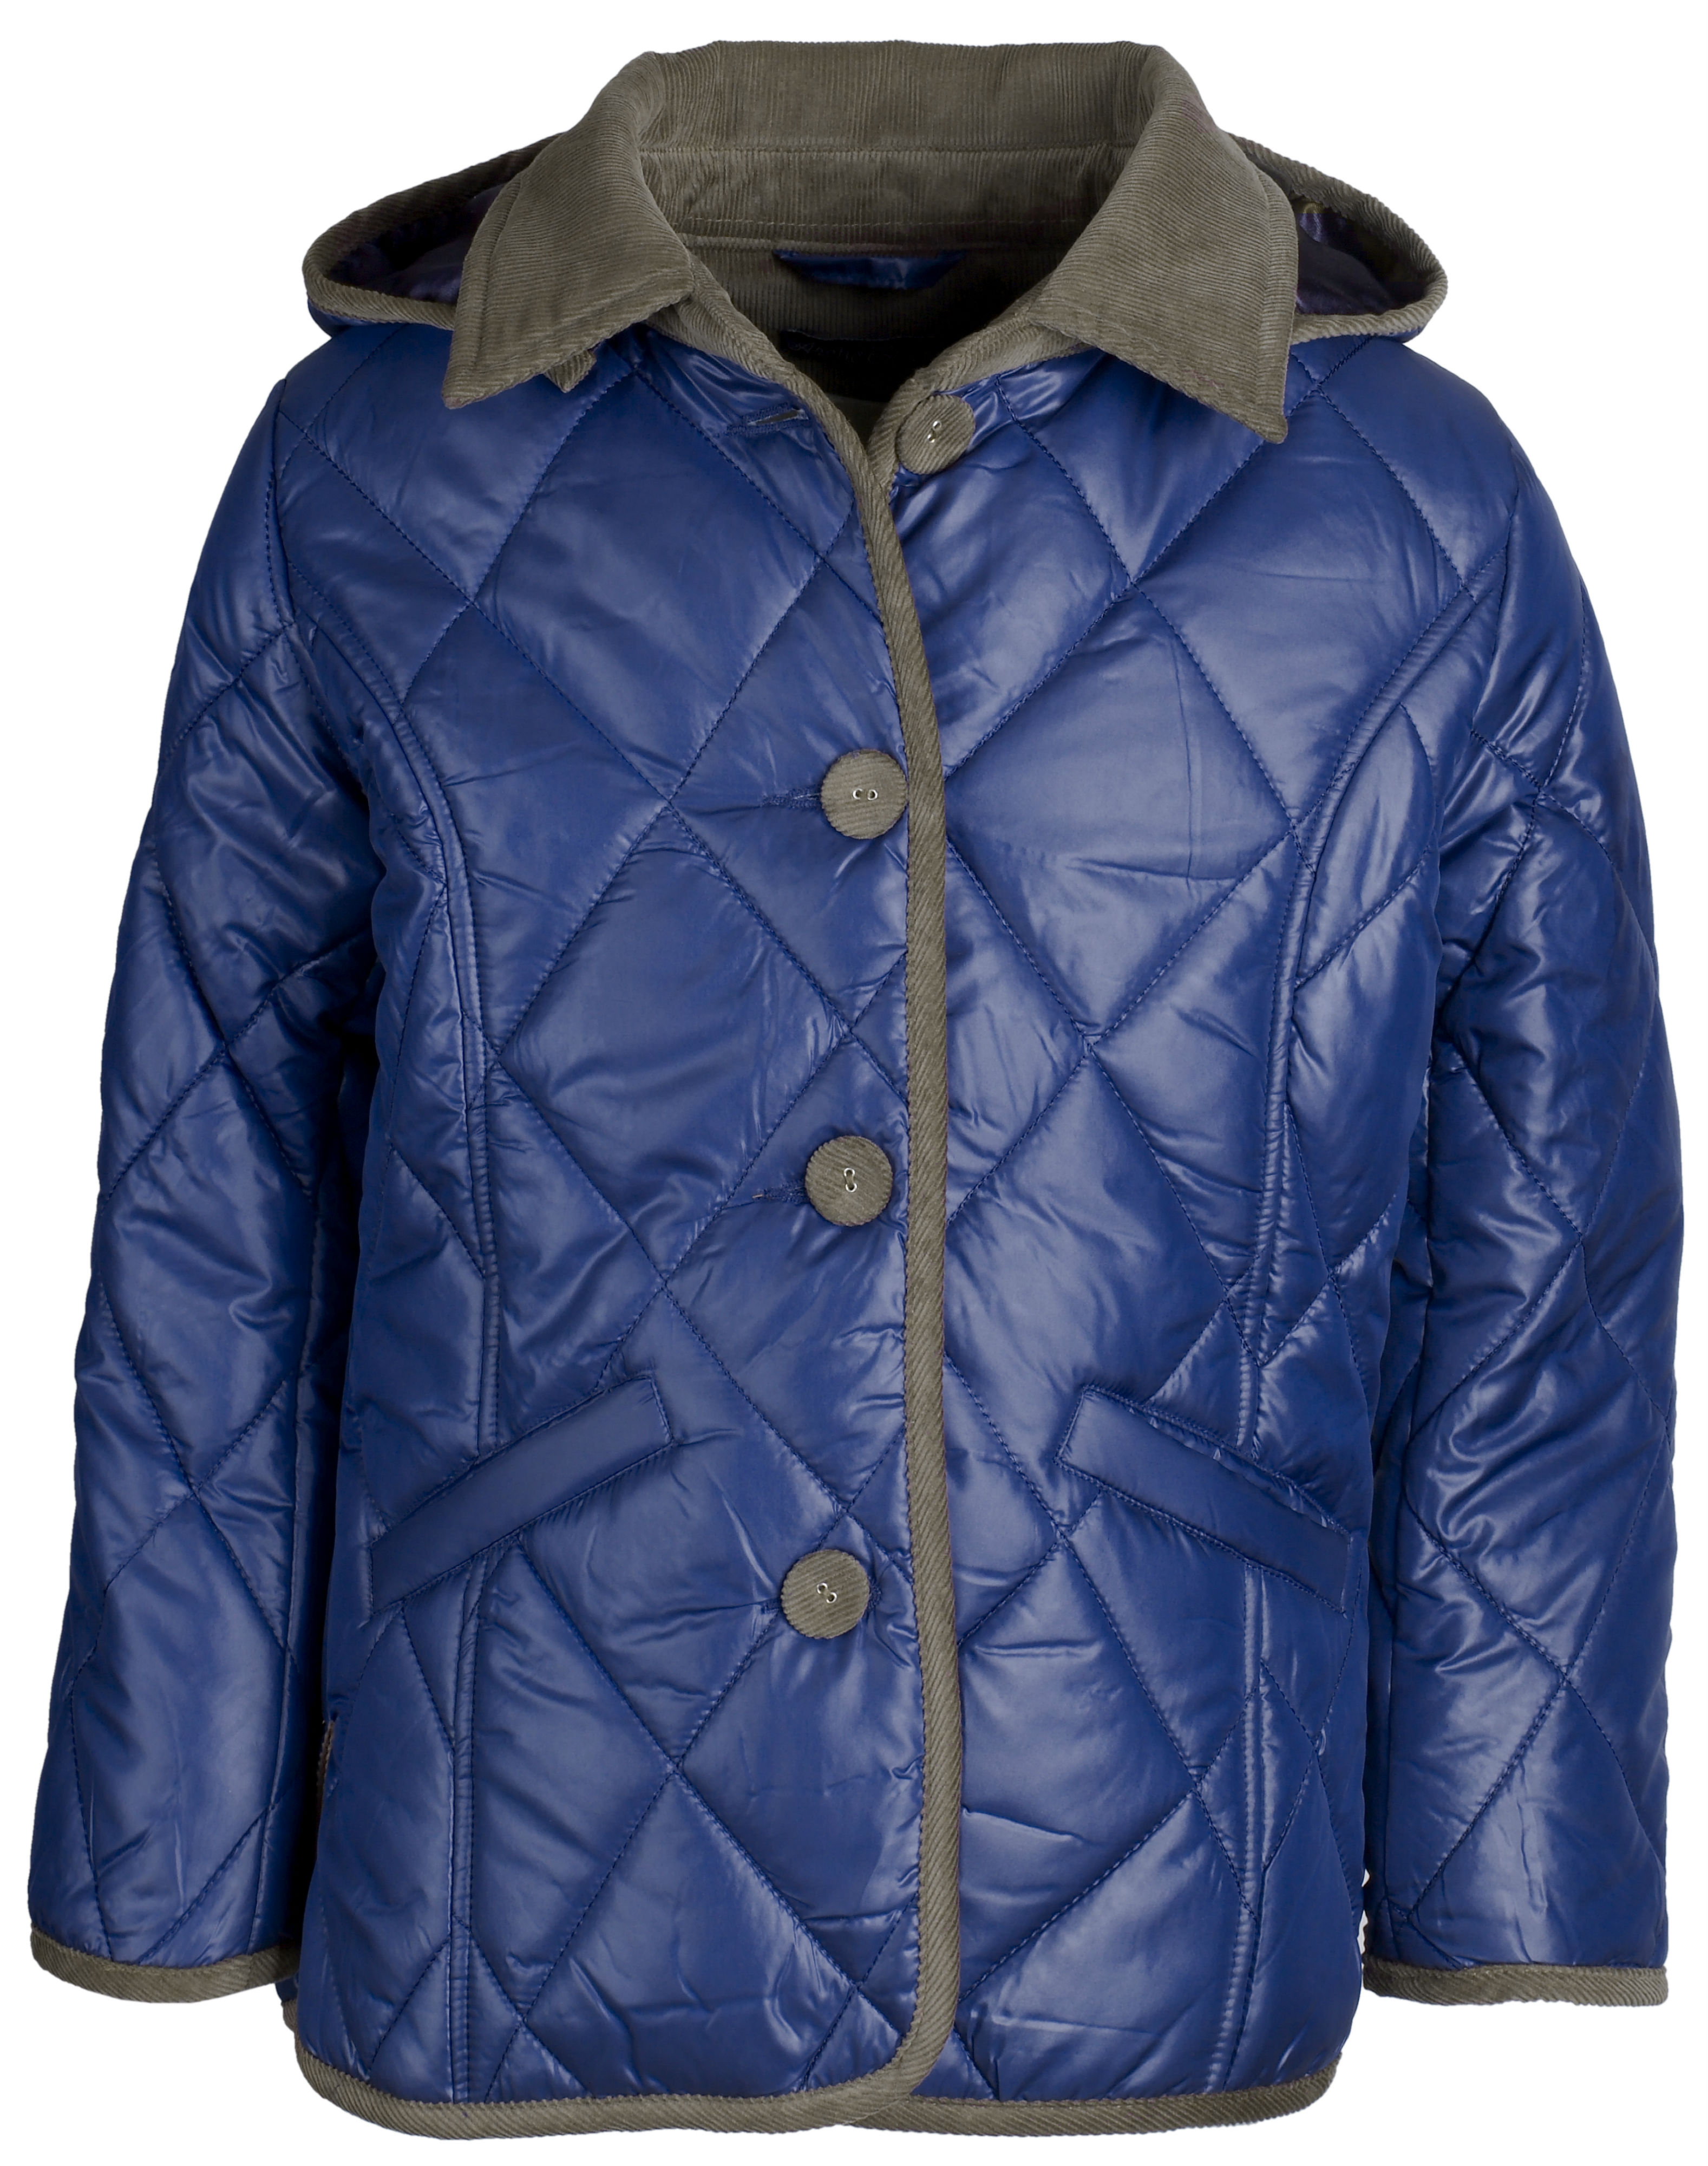 Arctic Circle Girls Padded Quilted Fall Winter Rain Trench Coat Jacket with Hood - image 2 of 4